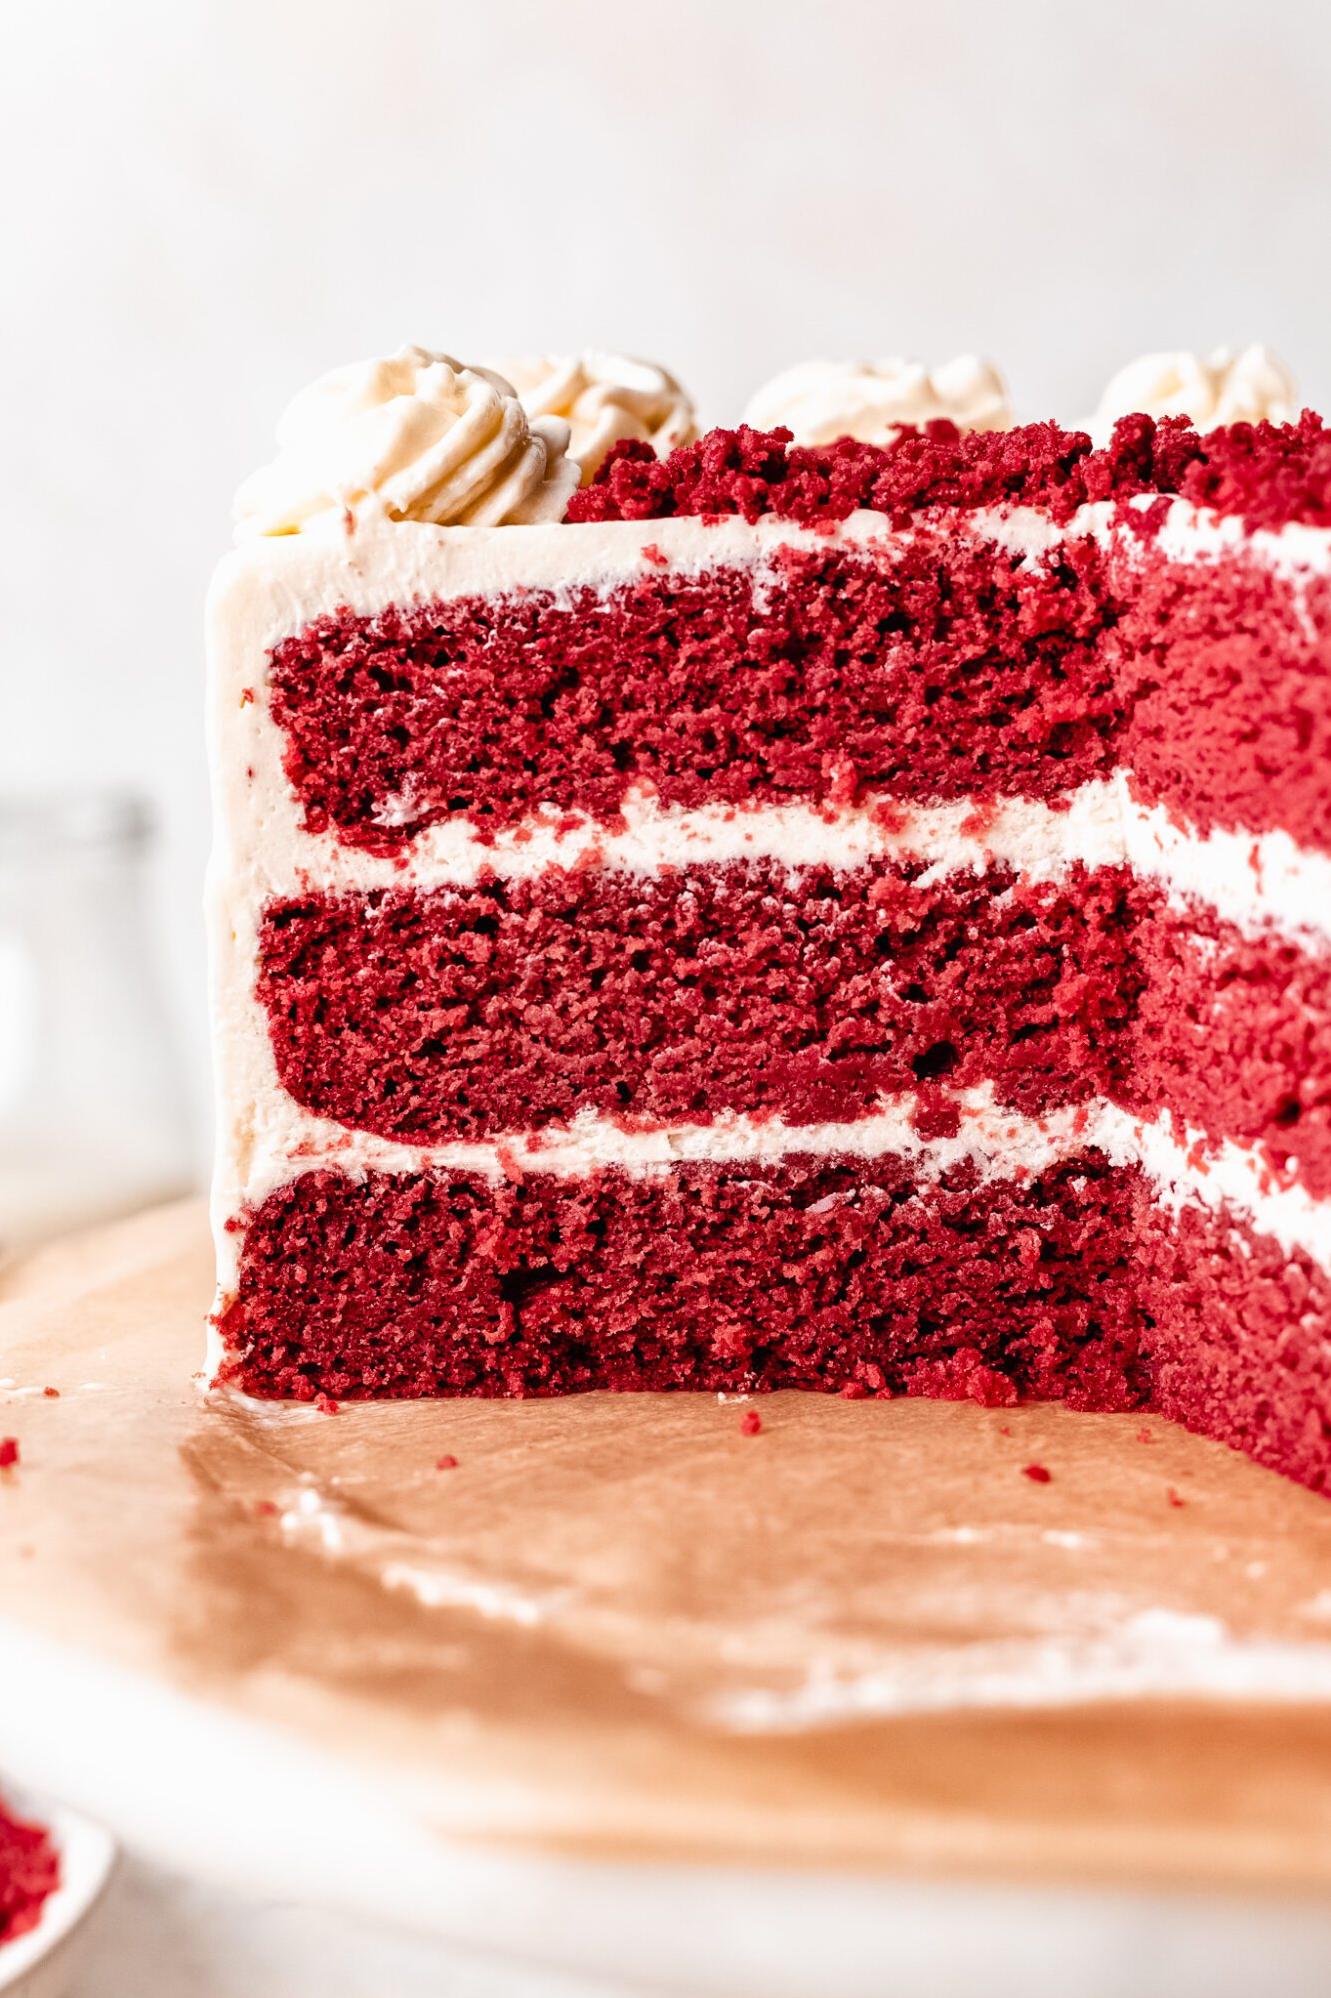  This cake is proof that vegan baking can be just as delicious as traditional baking.